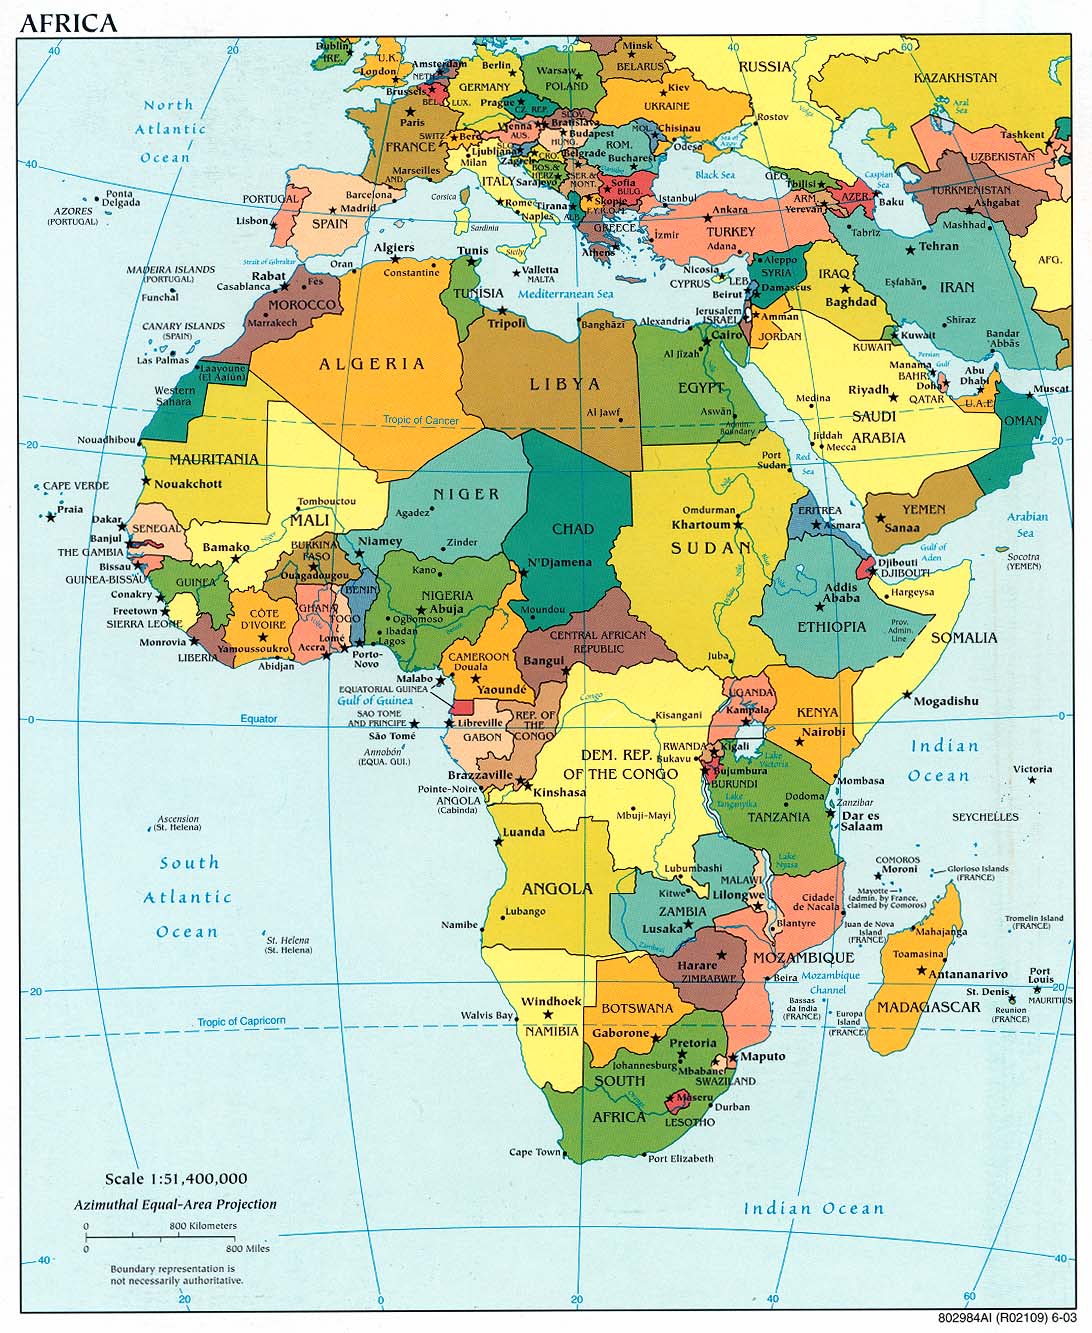 Classic atlas printable maps of the continent of Africa like this one.